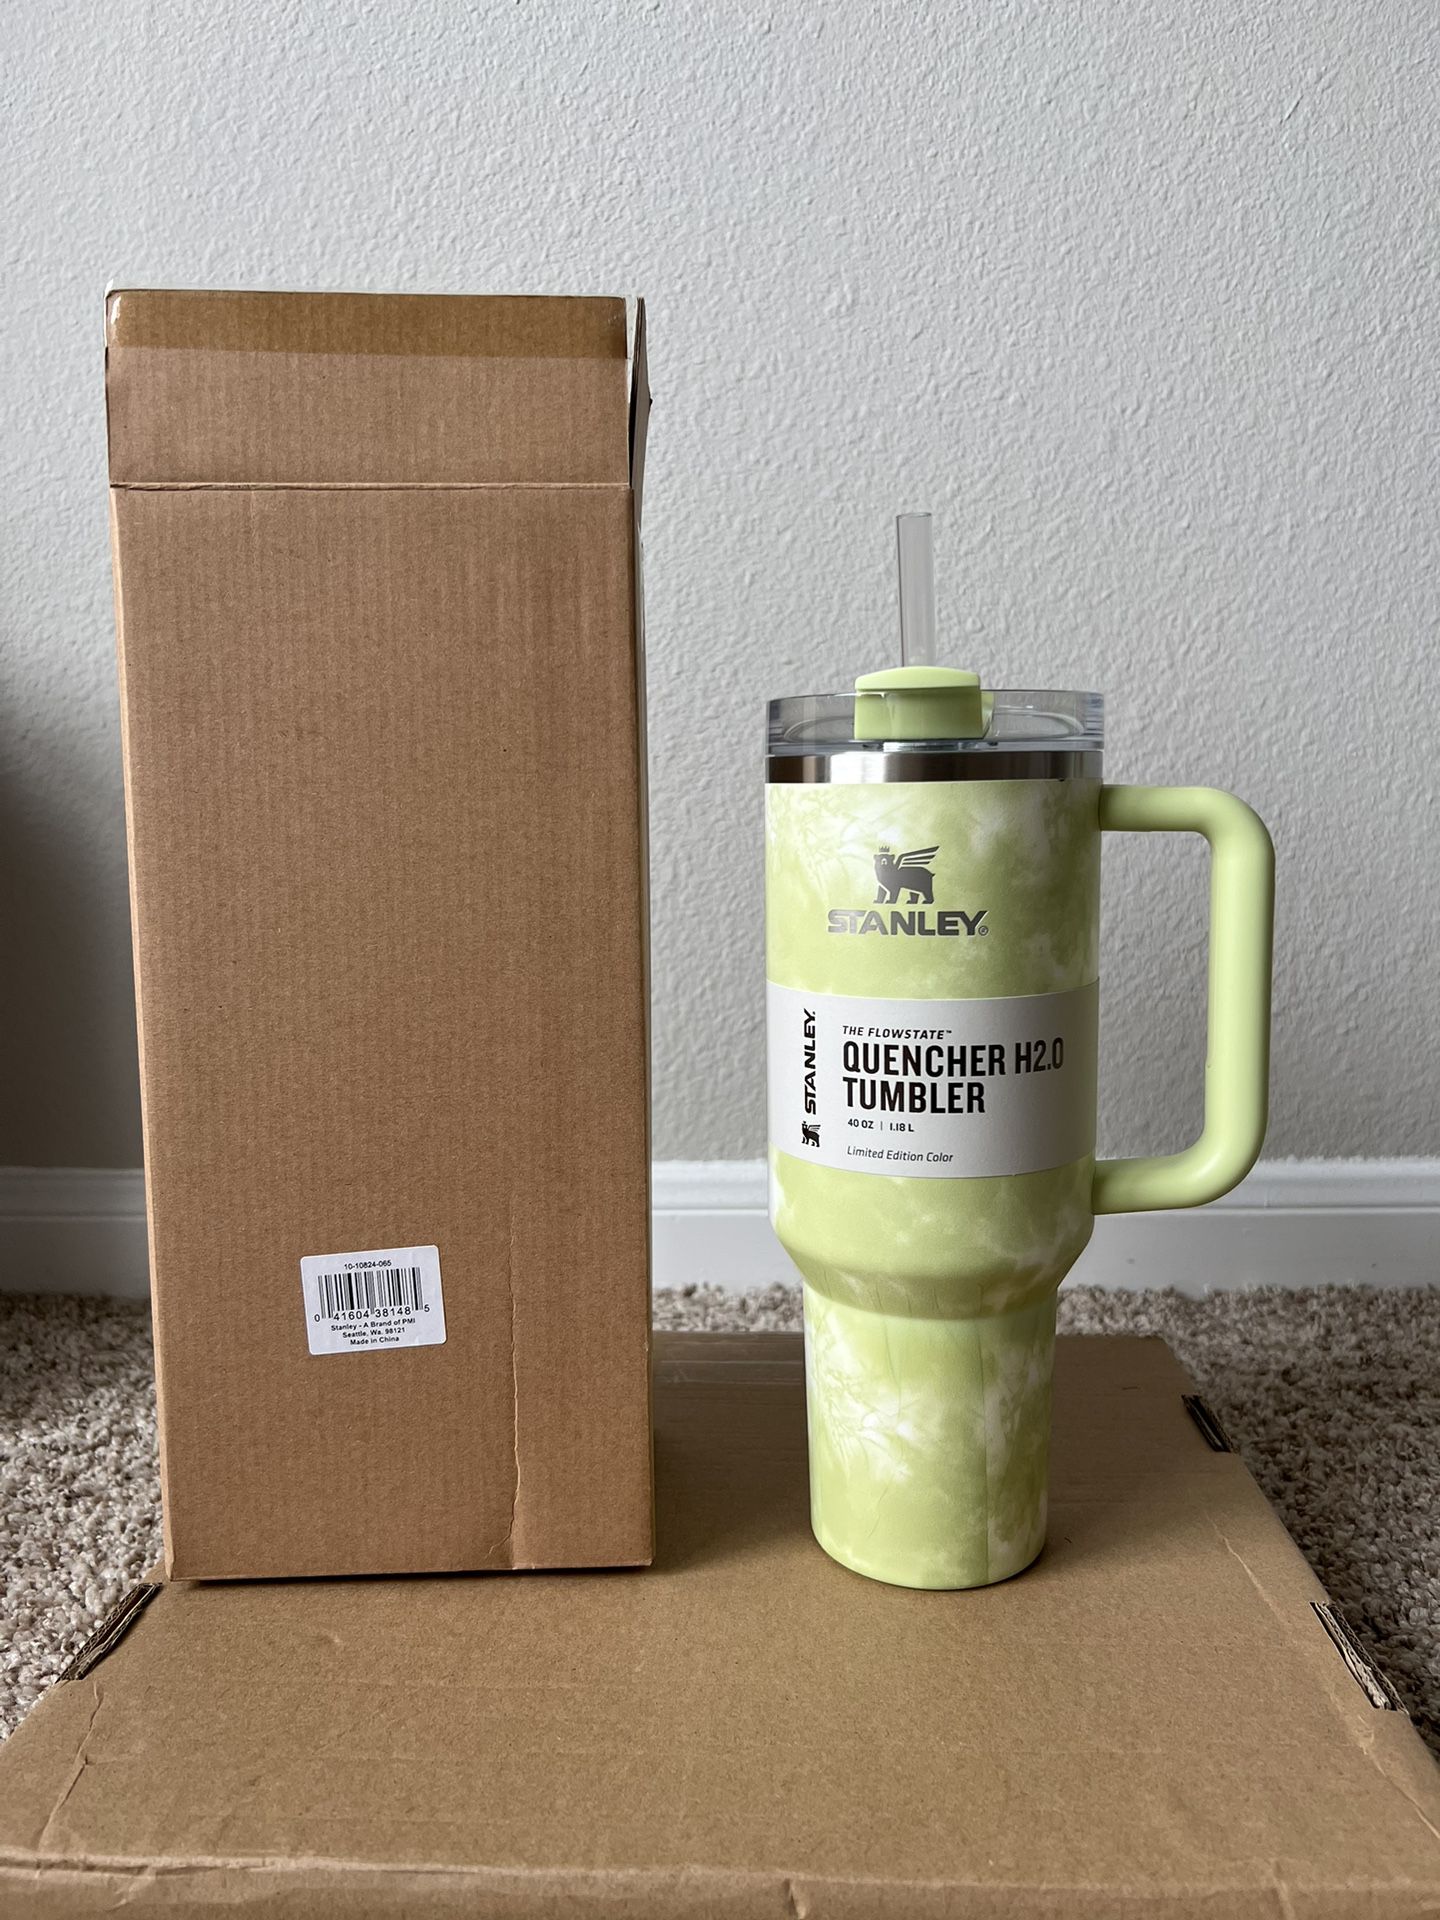 Stanley Flowstate H2.0 Tumbler 40oz Green Citron Tie Dye LIMITED EDITION